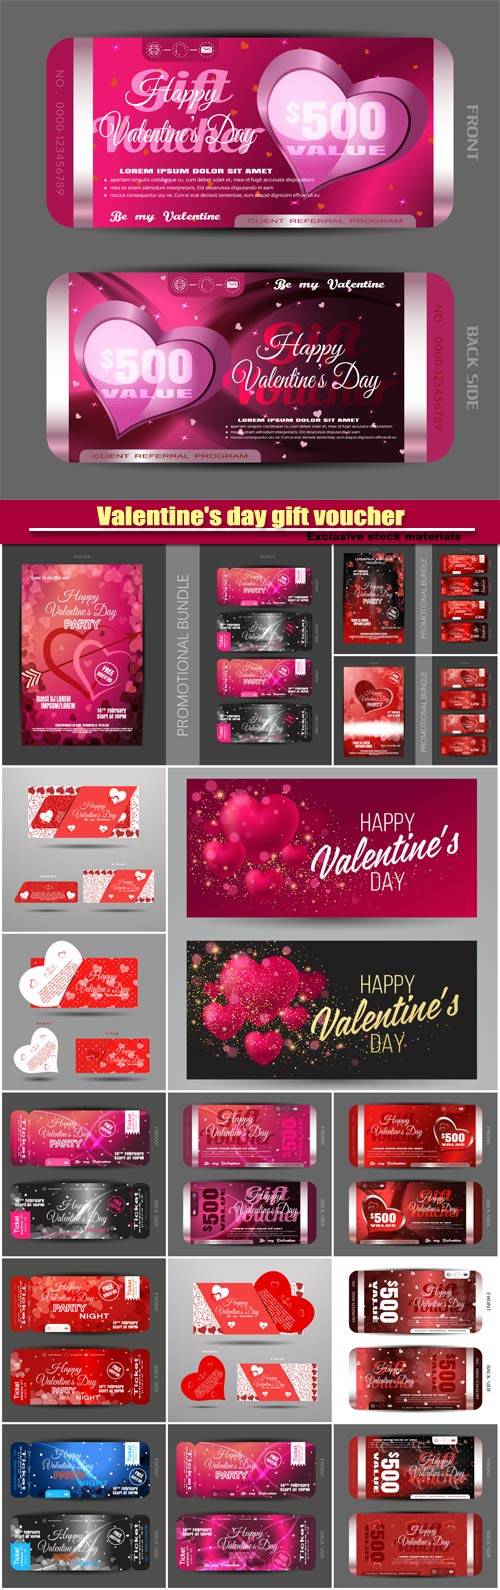 Vector set of greeting card and happy Valentine's day gift voucher